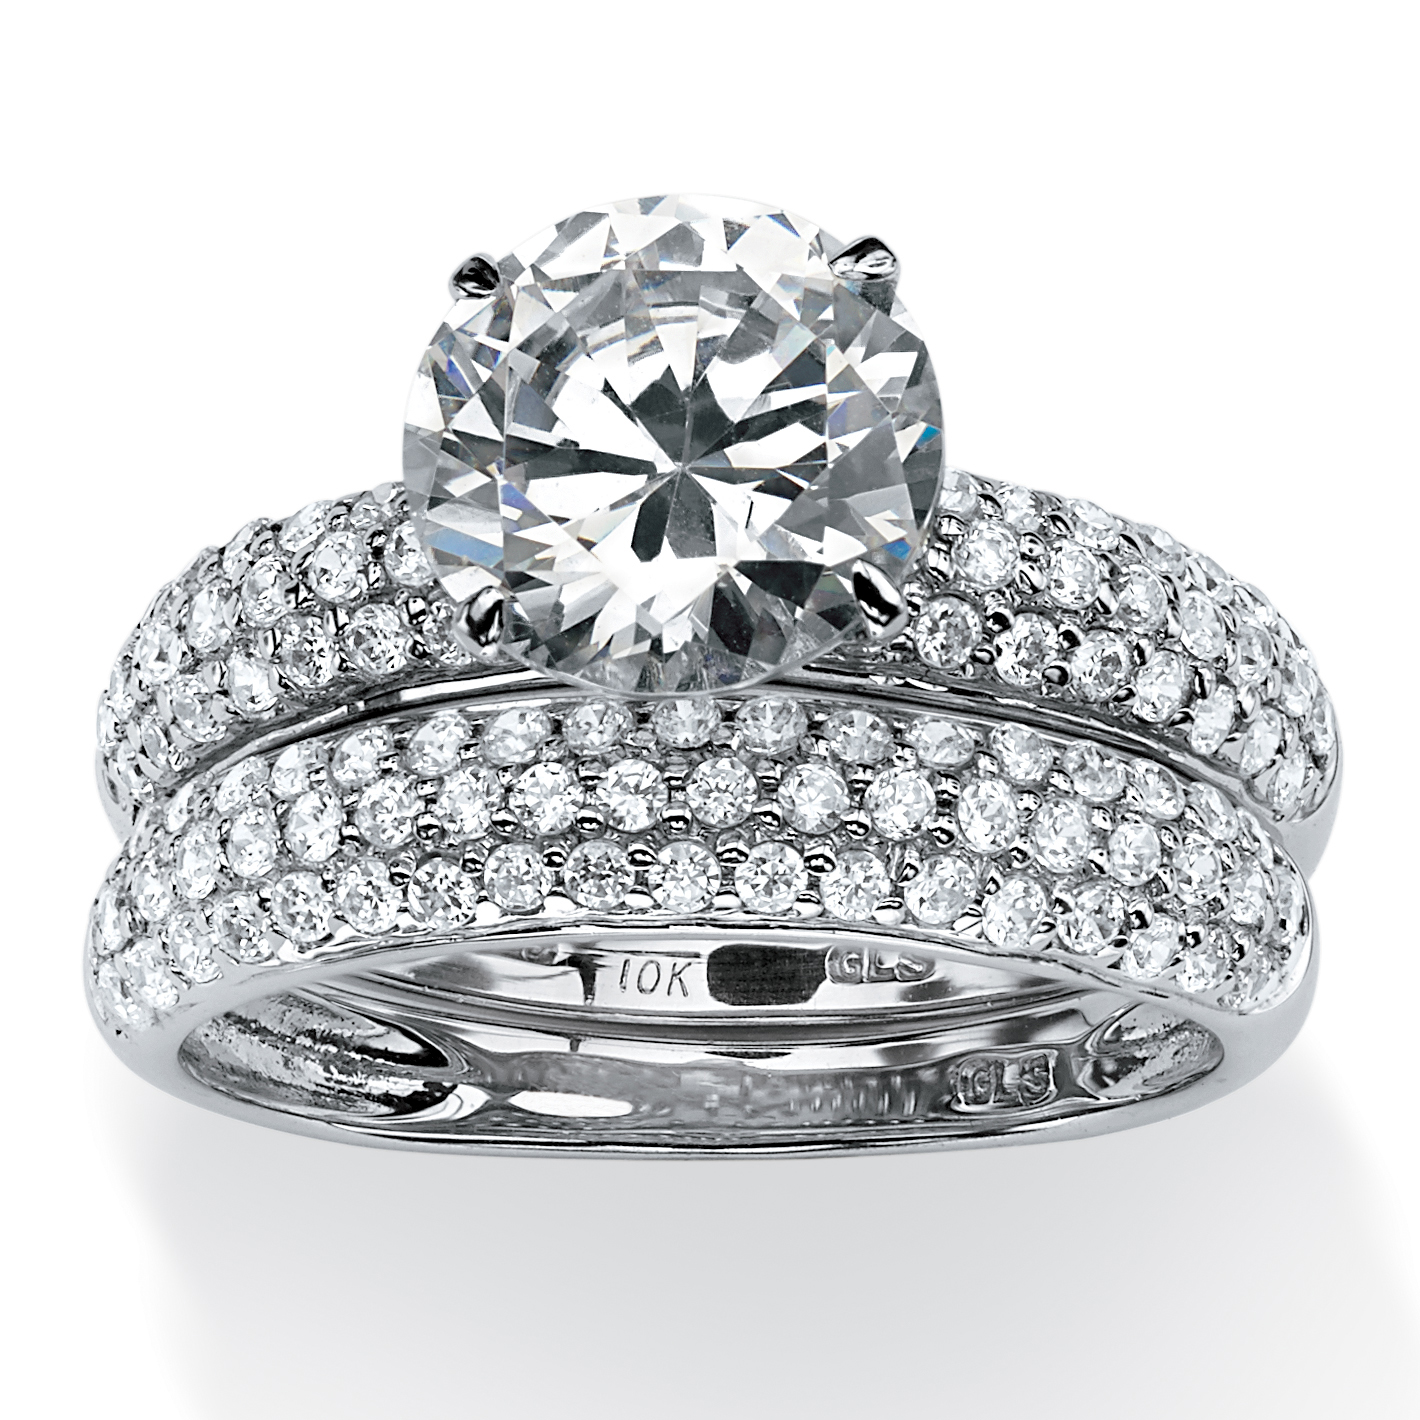 PalmBeach Jewelry 2 Piece 3.80 TCW Pave Cubic Zirconia Bridal Ring Set in Solid 10k White Gold